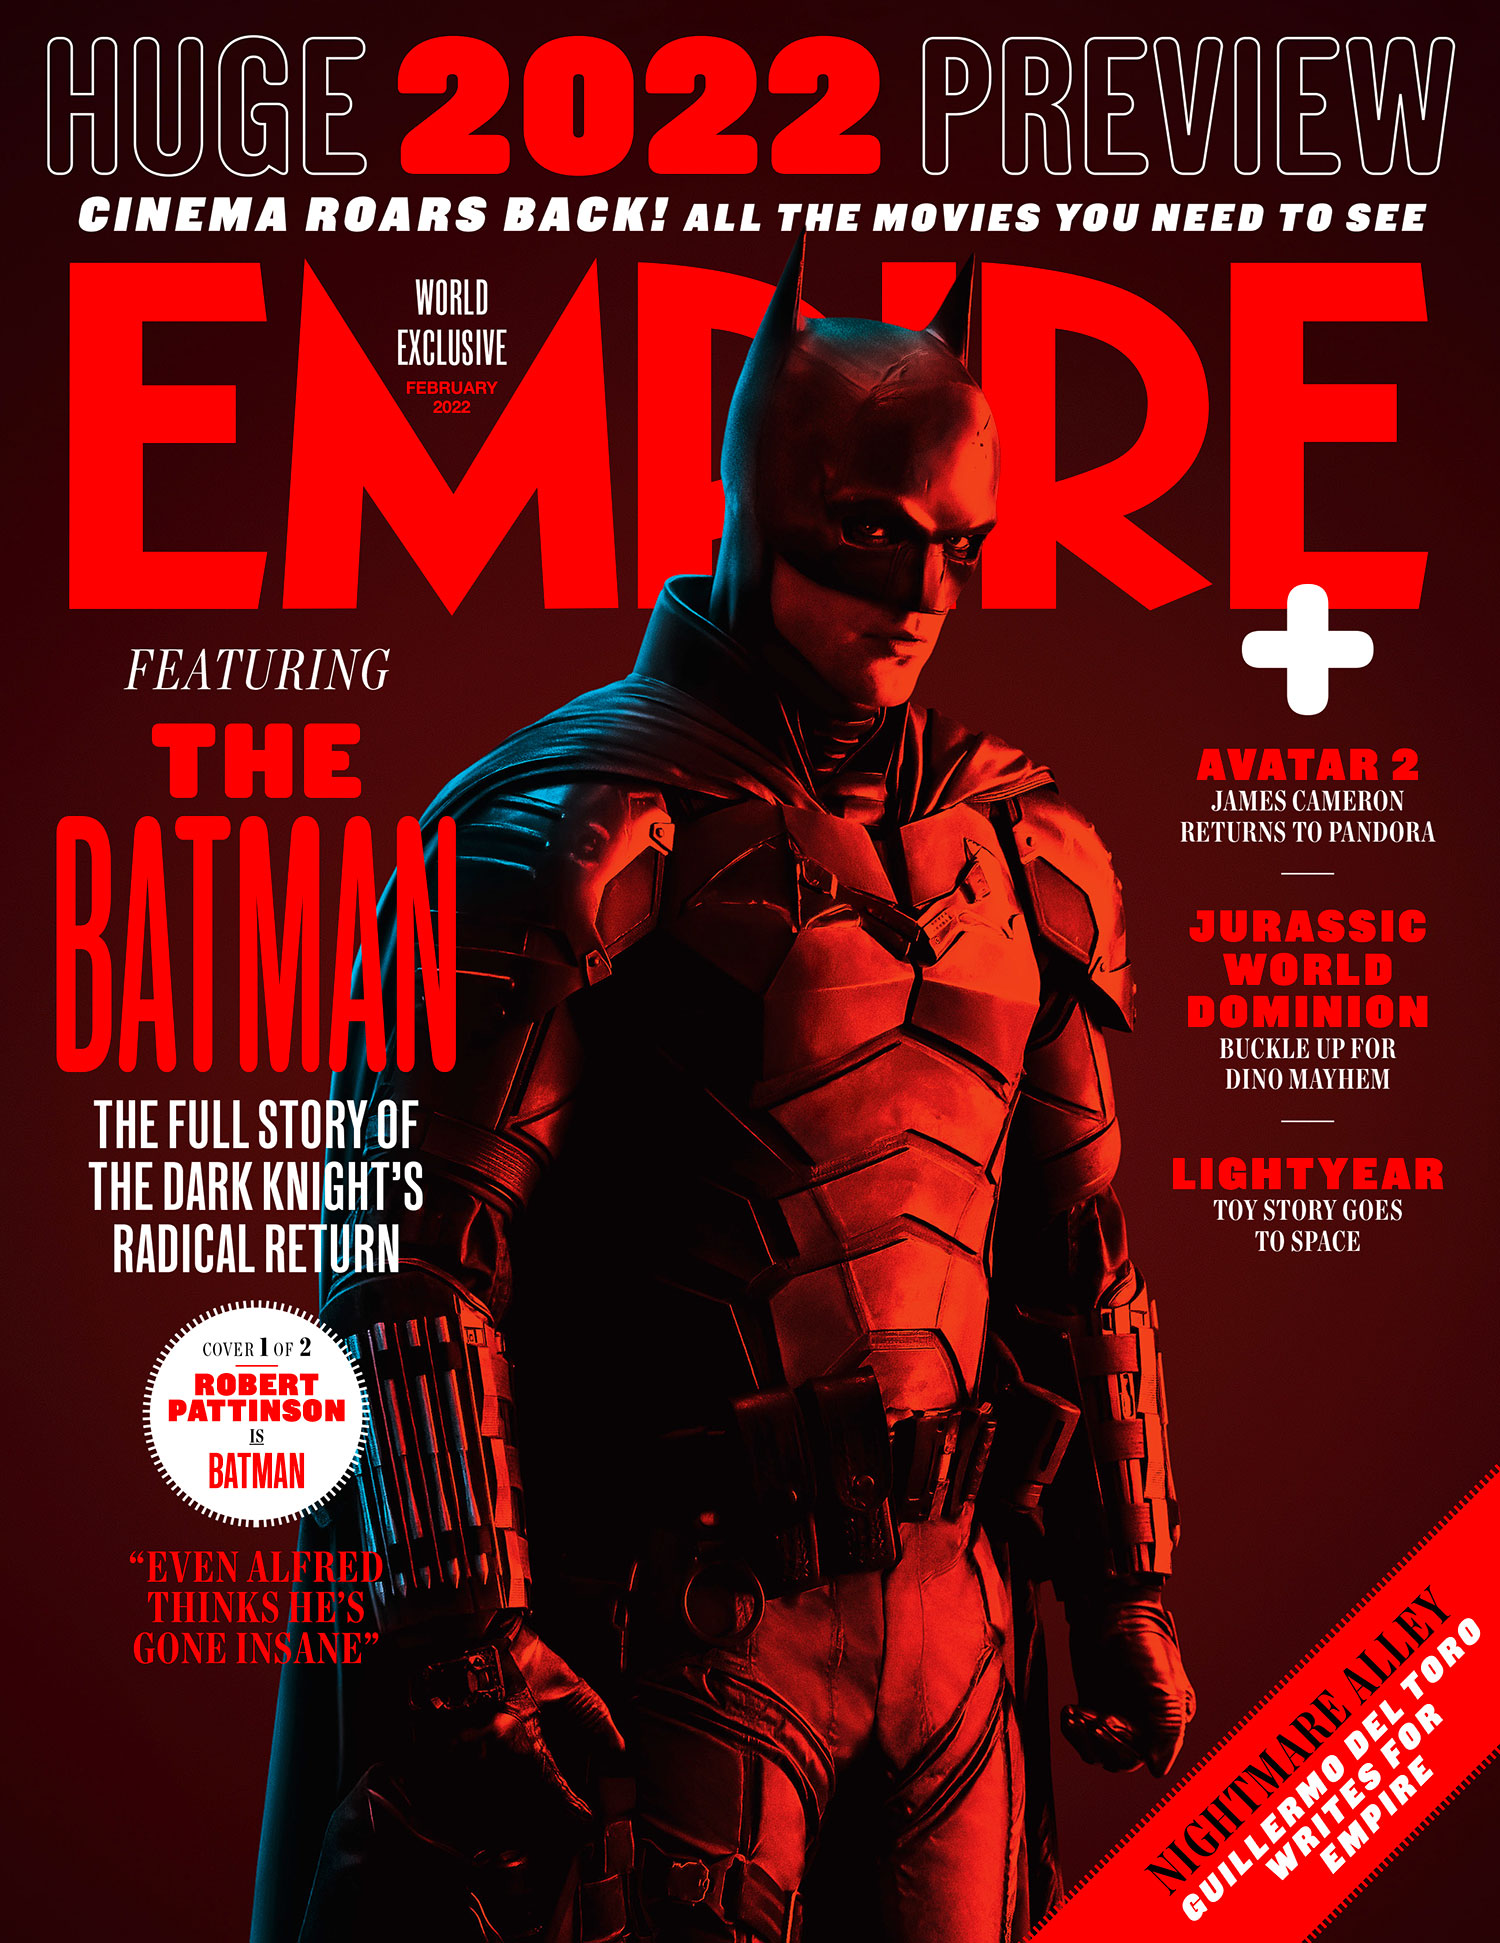 Empire Magazine on Twitter: "Light up the Bat-Signal – Empire's  world-exclusive #TheBatman issue is here, with the full story on the caped  crusader's radical reinvention. The first of two collectible covers features